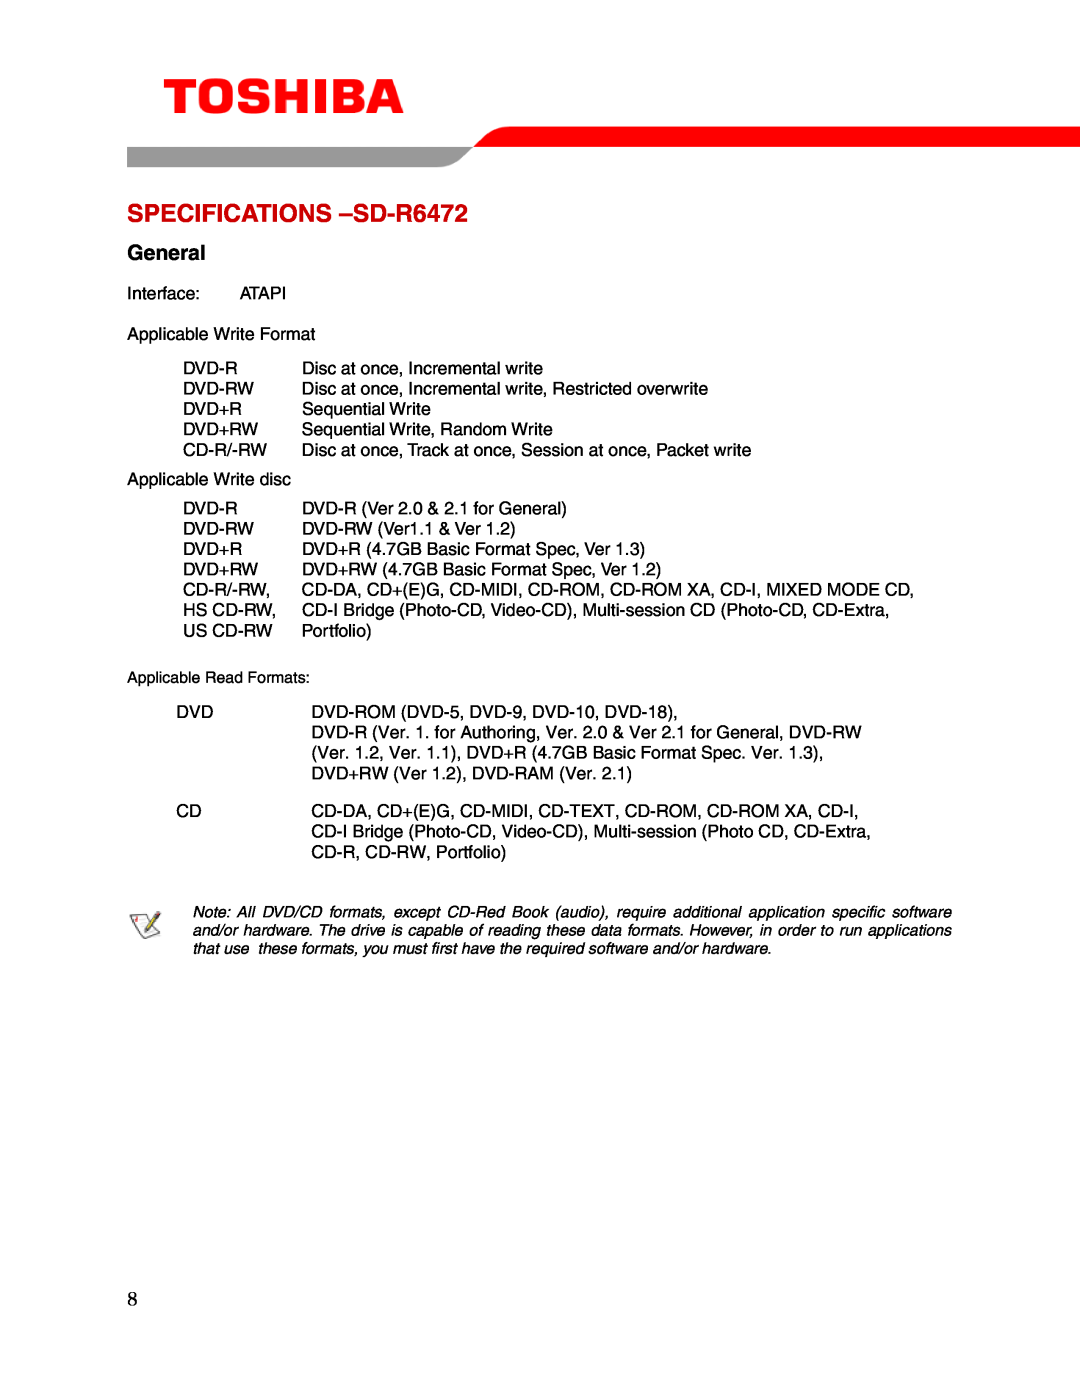 Toshiba user manual SPECIFICATIONS -SD-R6472, General 